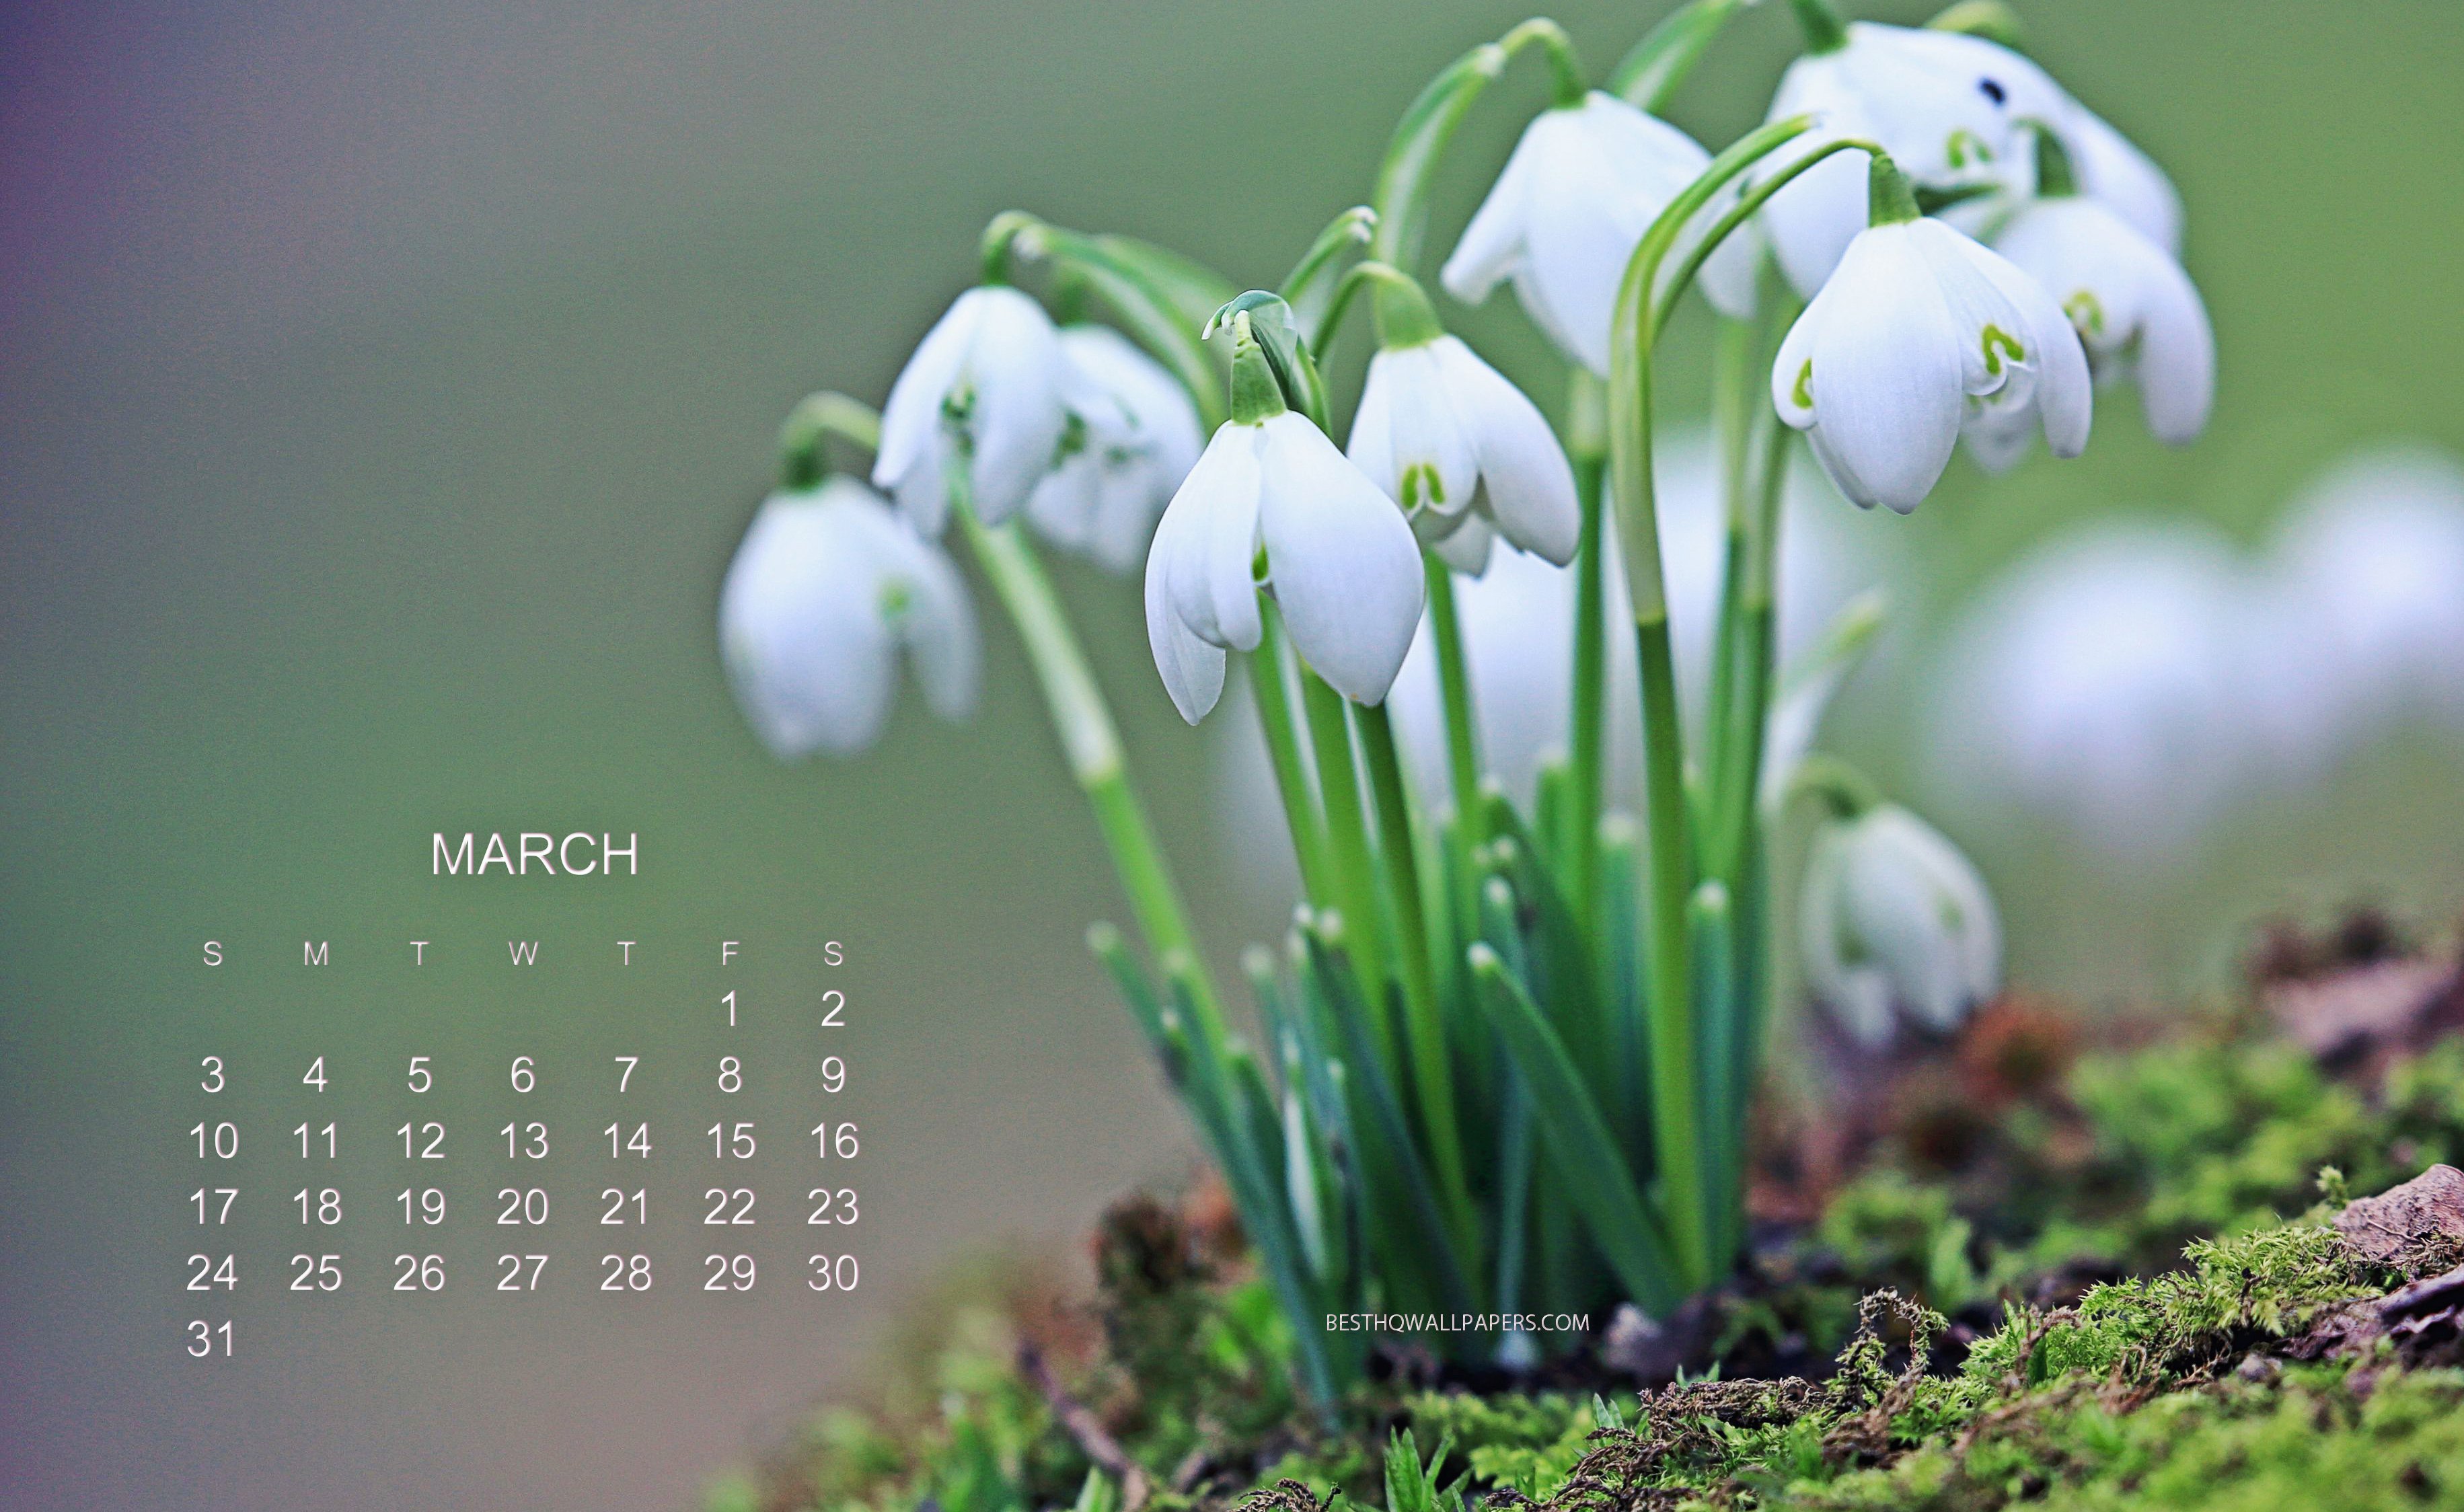 south-africa-holiday-calendar-for-march-2019